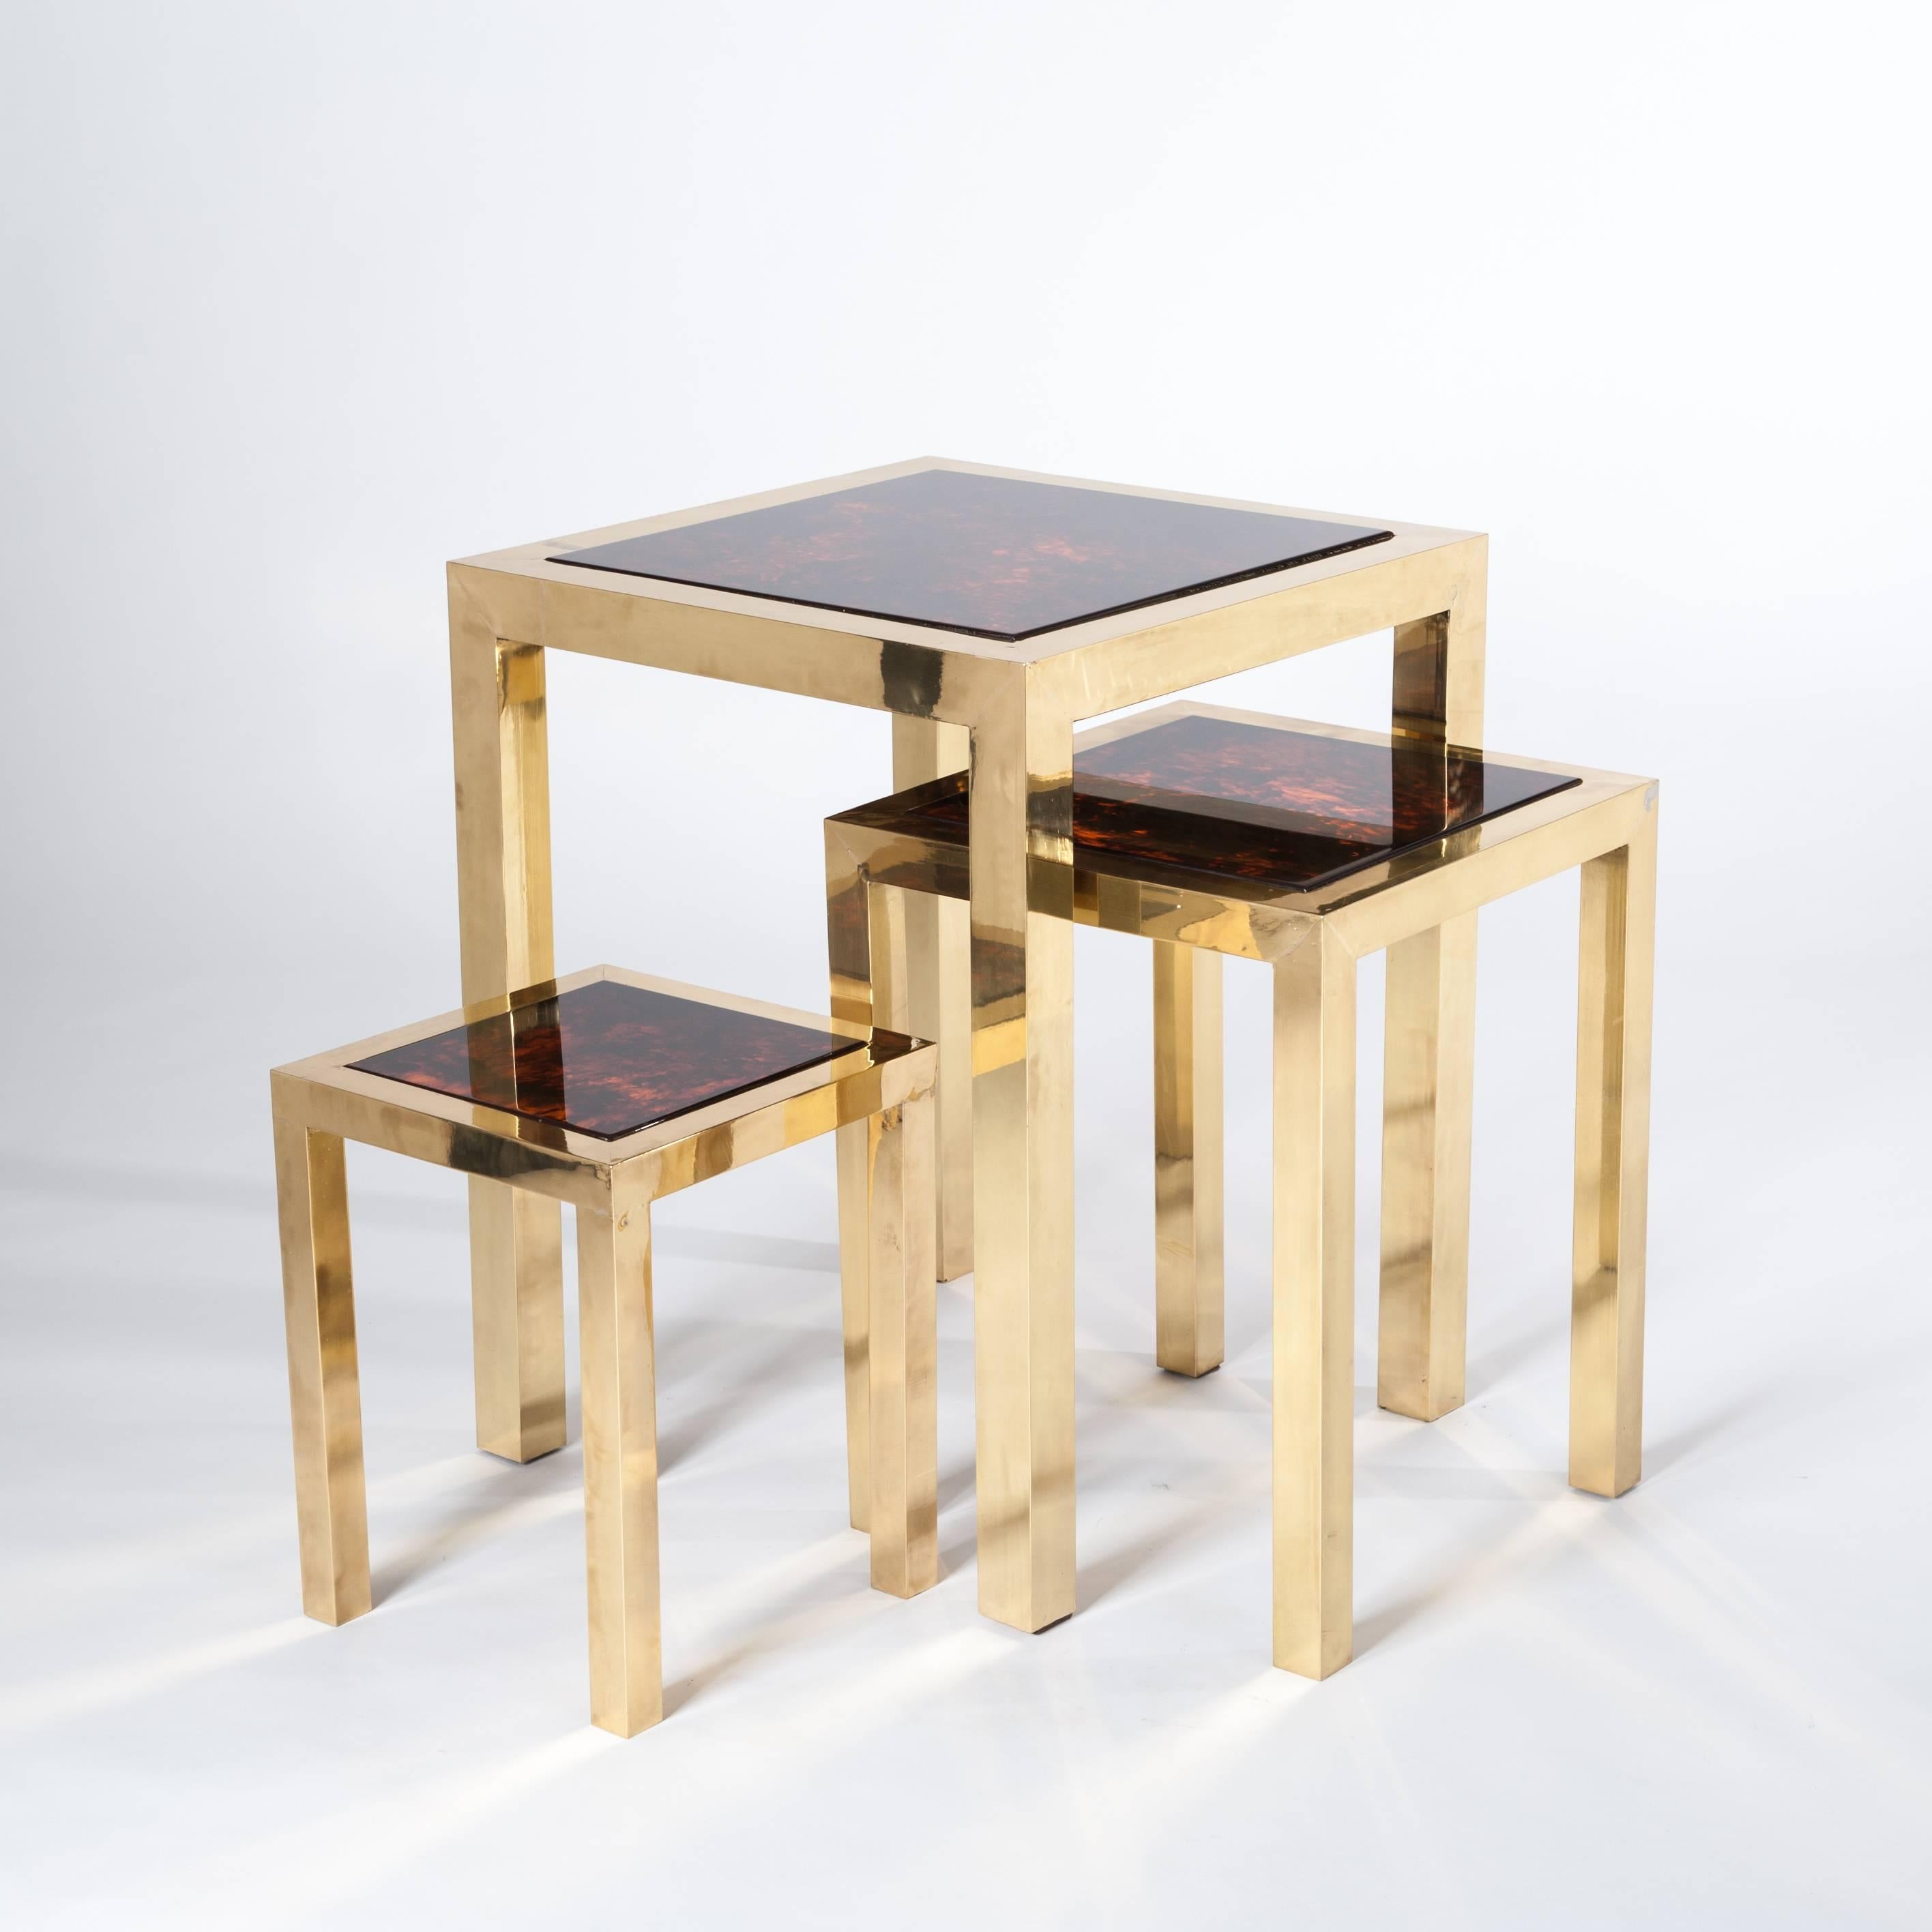 Extraordinary set of nesting tables in strong modernist shape by Romeo Rega.
Brass metalwork in strict design with warm brownish marmorized bakelit tabletop.
Measurements:
Table small: Length 33cm x depth 33cm x height 43cm
Table medium: Length 43cm